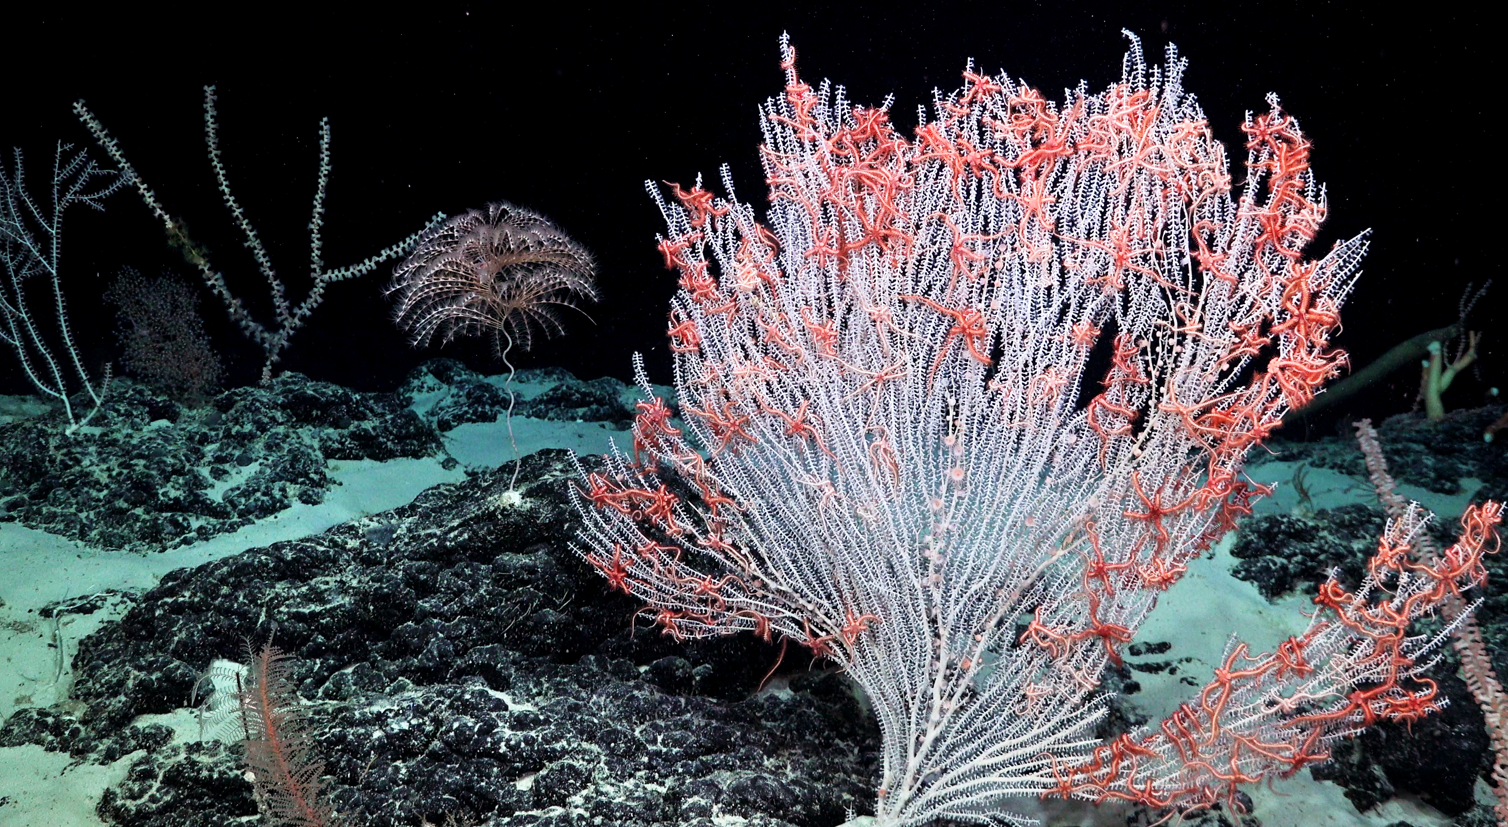 See wild, stunning creatures just found in the unexplored deep ocean